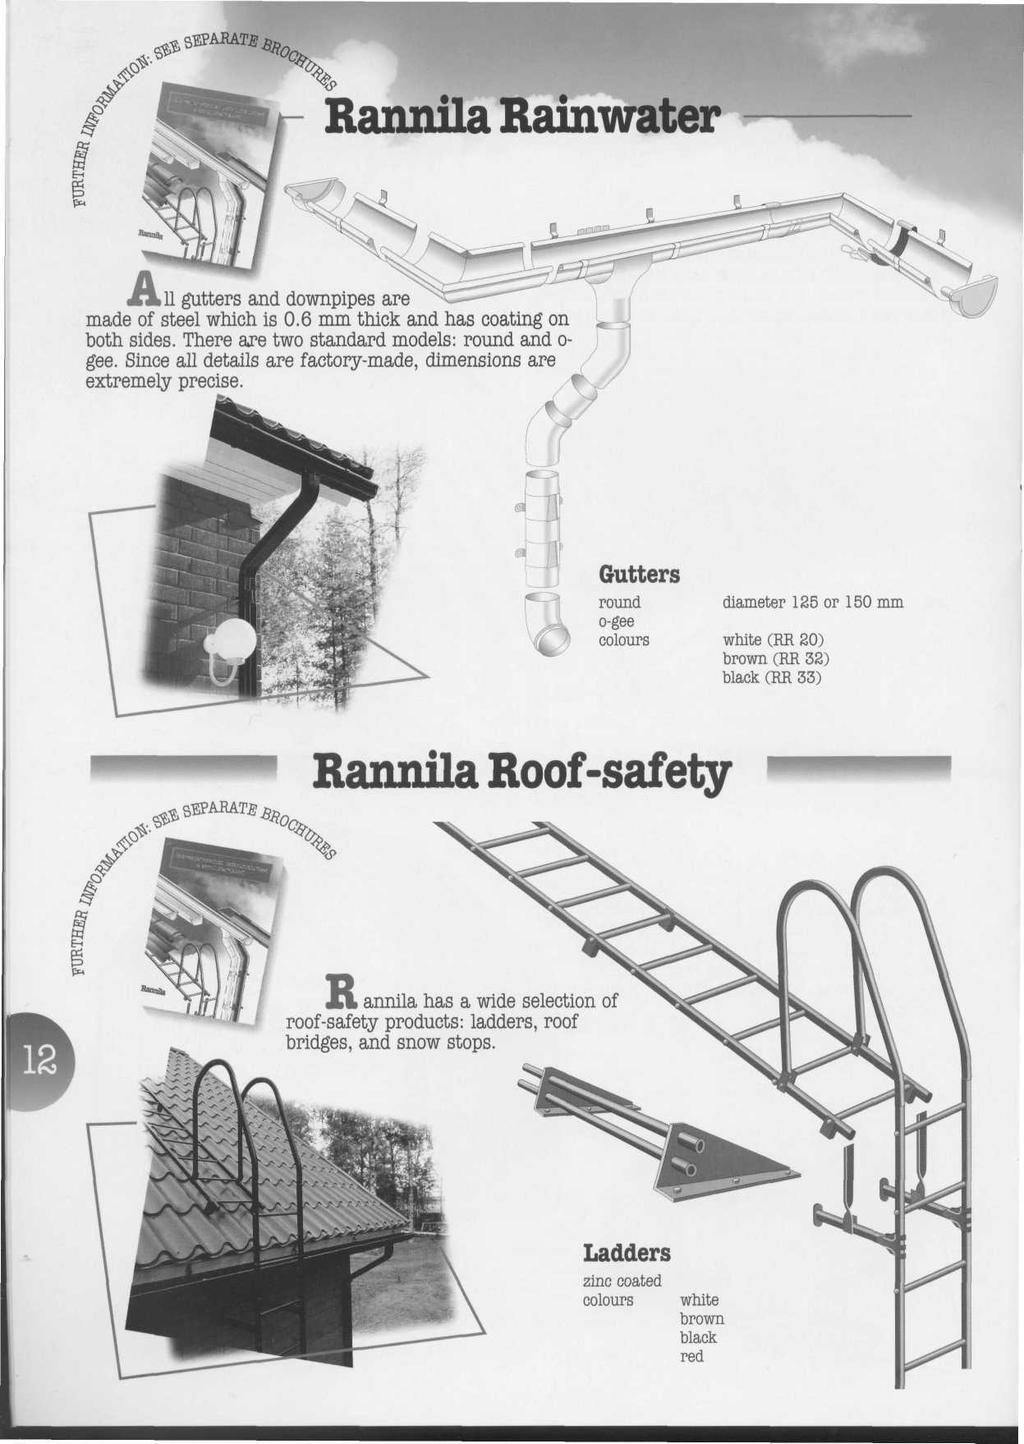 Rannila Rainwater Л1 gutters and downpipes are made of steel which is 0.6 mm thick and has coating on both sides. There are two standard models: round and o- gee.